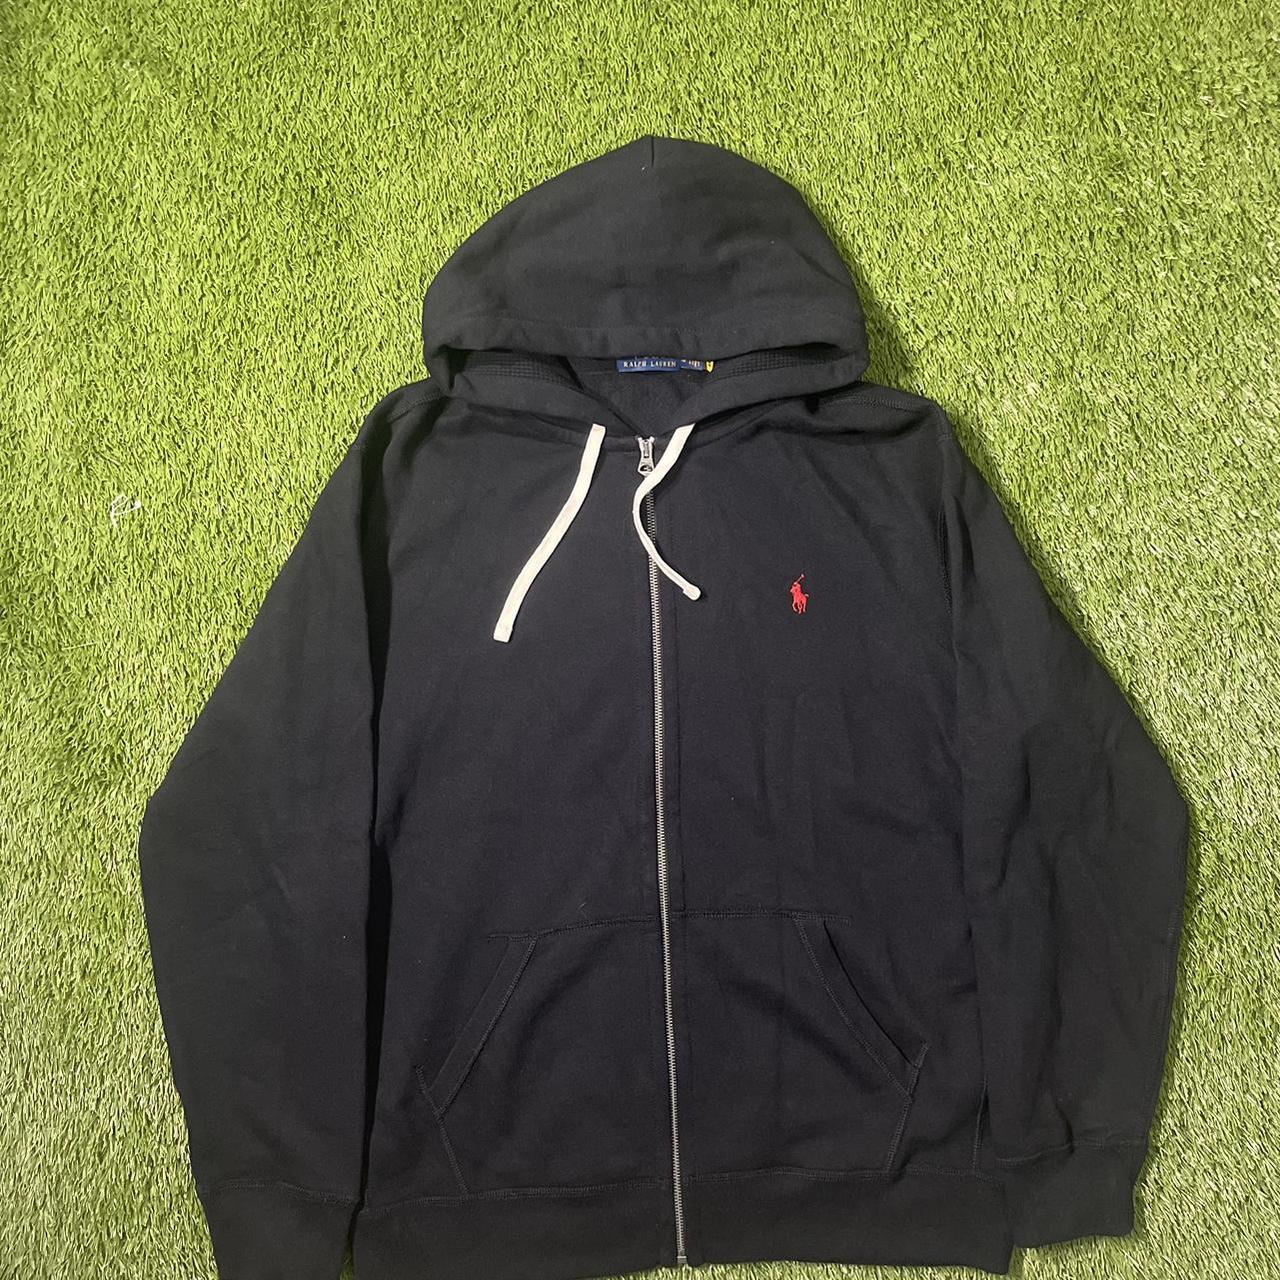 Ralph Lauren Polo Zip Up - Used once - Size L - Depop